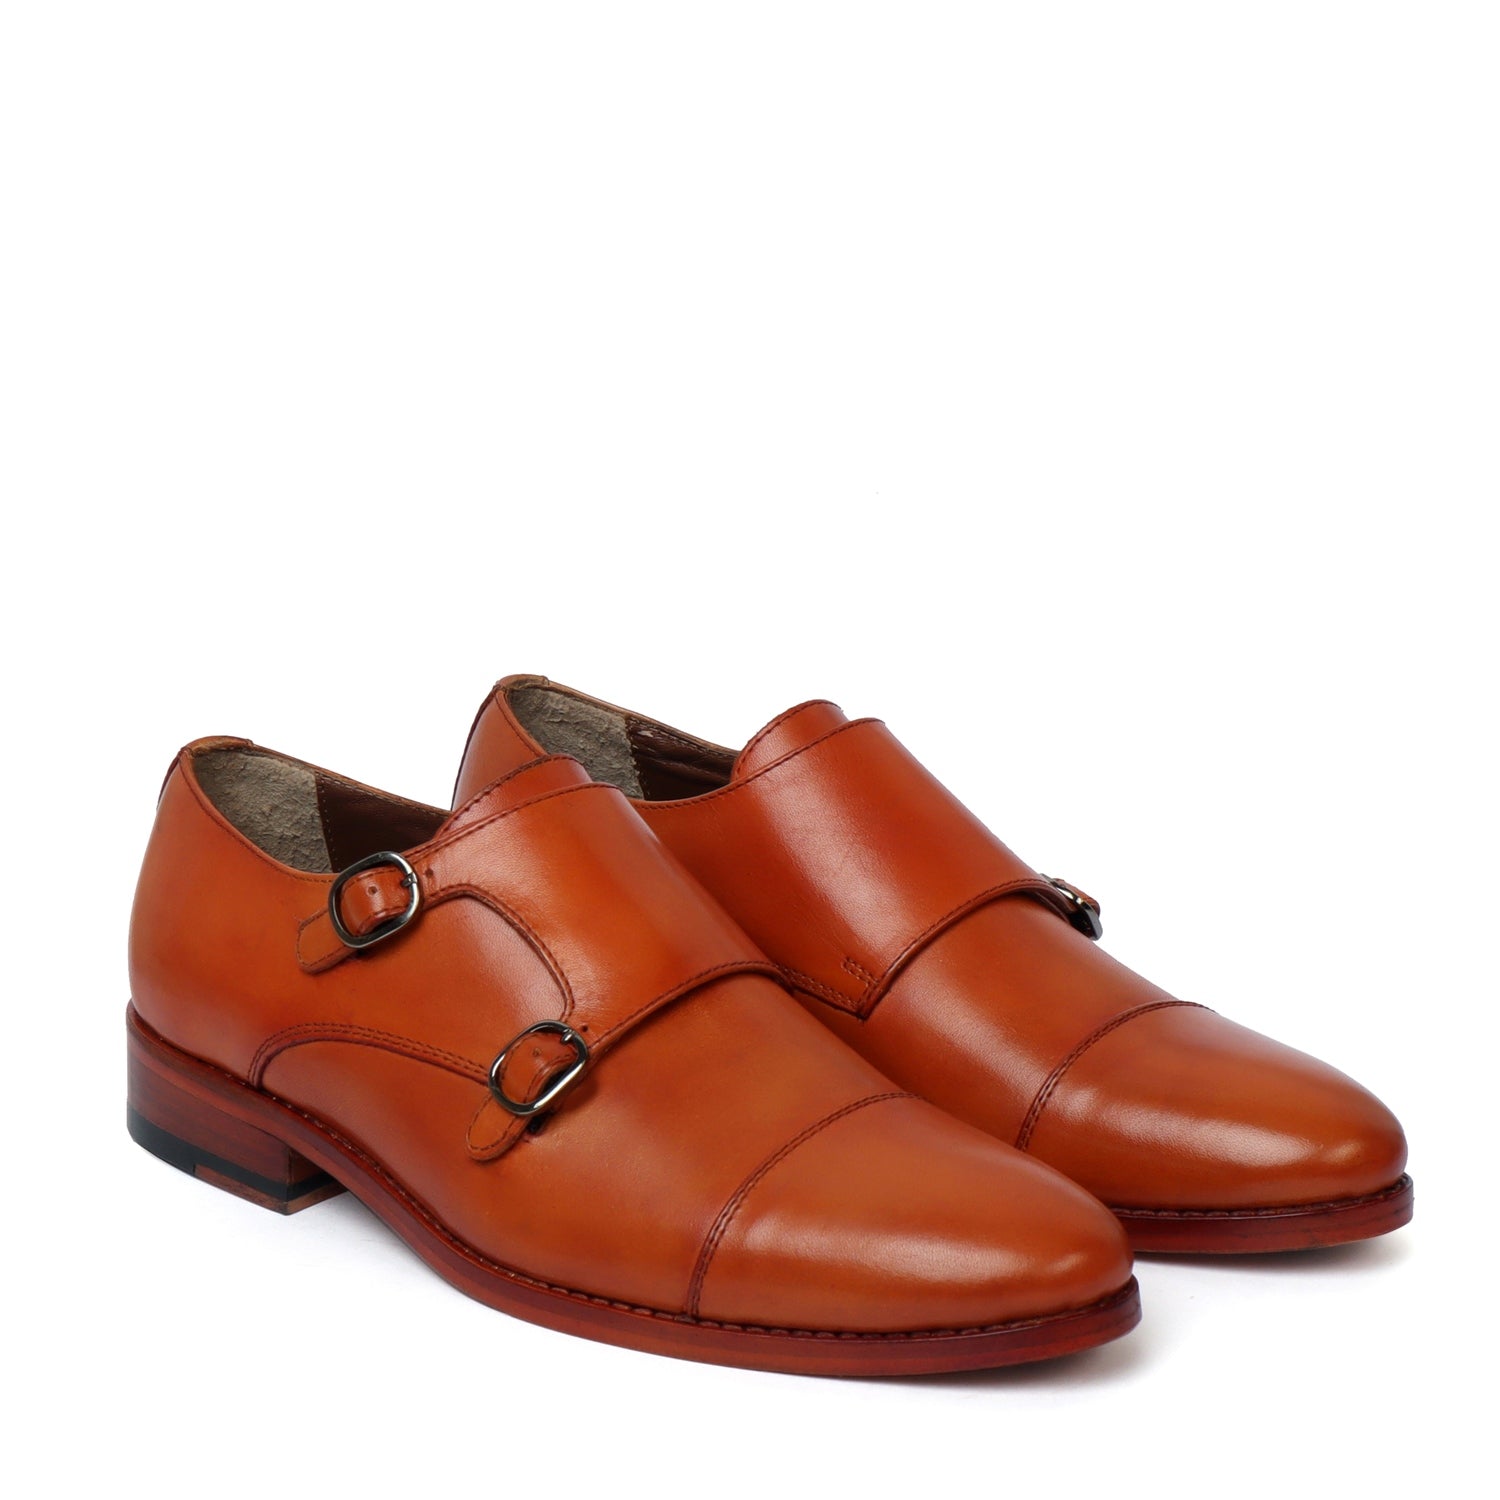 Men's Tan Leather Double Monk With Leather Sole Shoes By Brune & Bareskin